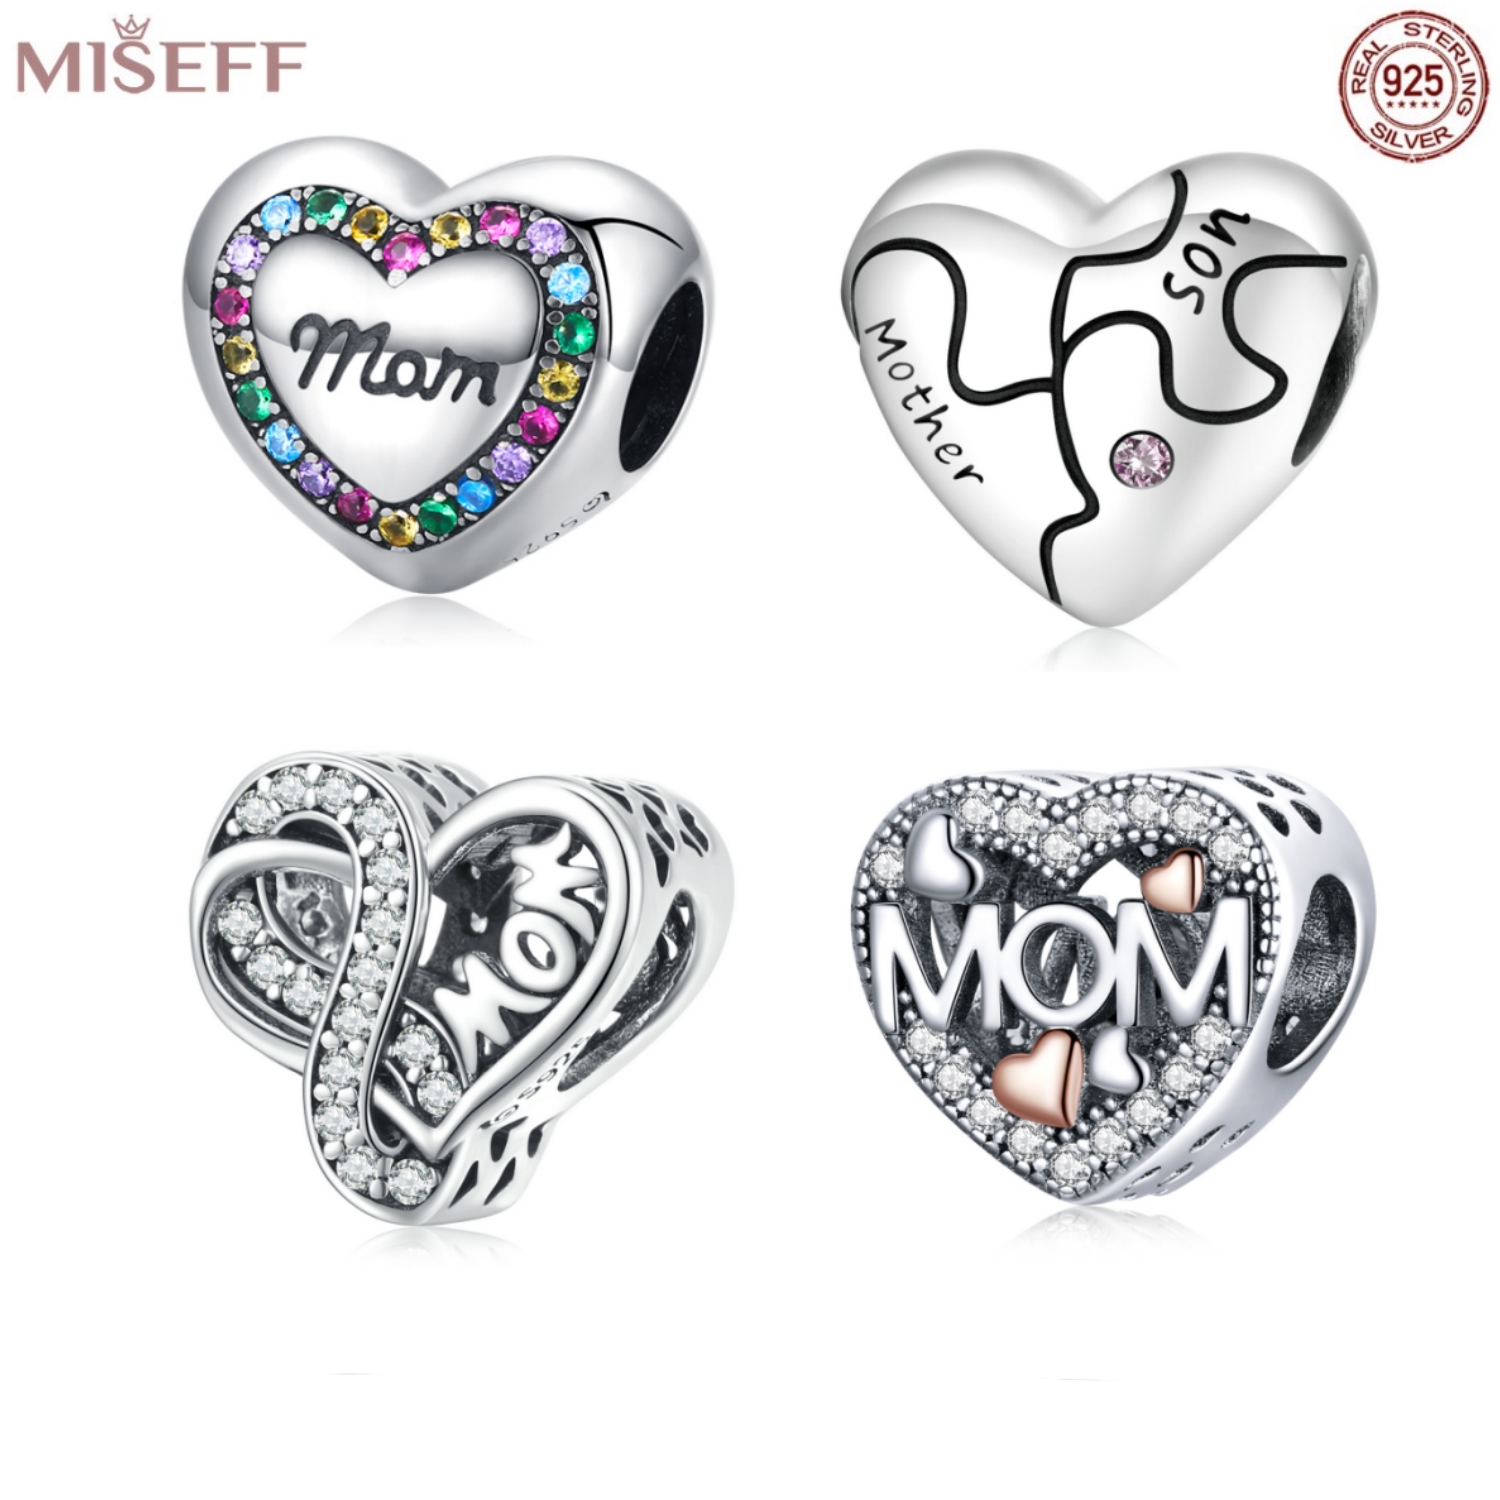 8 1 Mom Charms for Jewelry Making 18x6mm by TIJC SP2149 